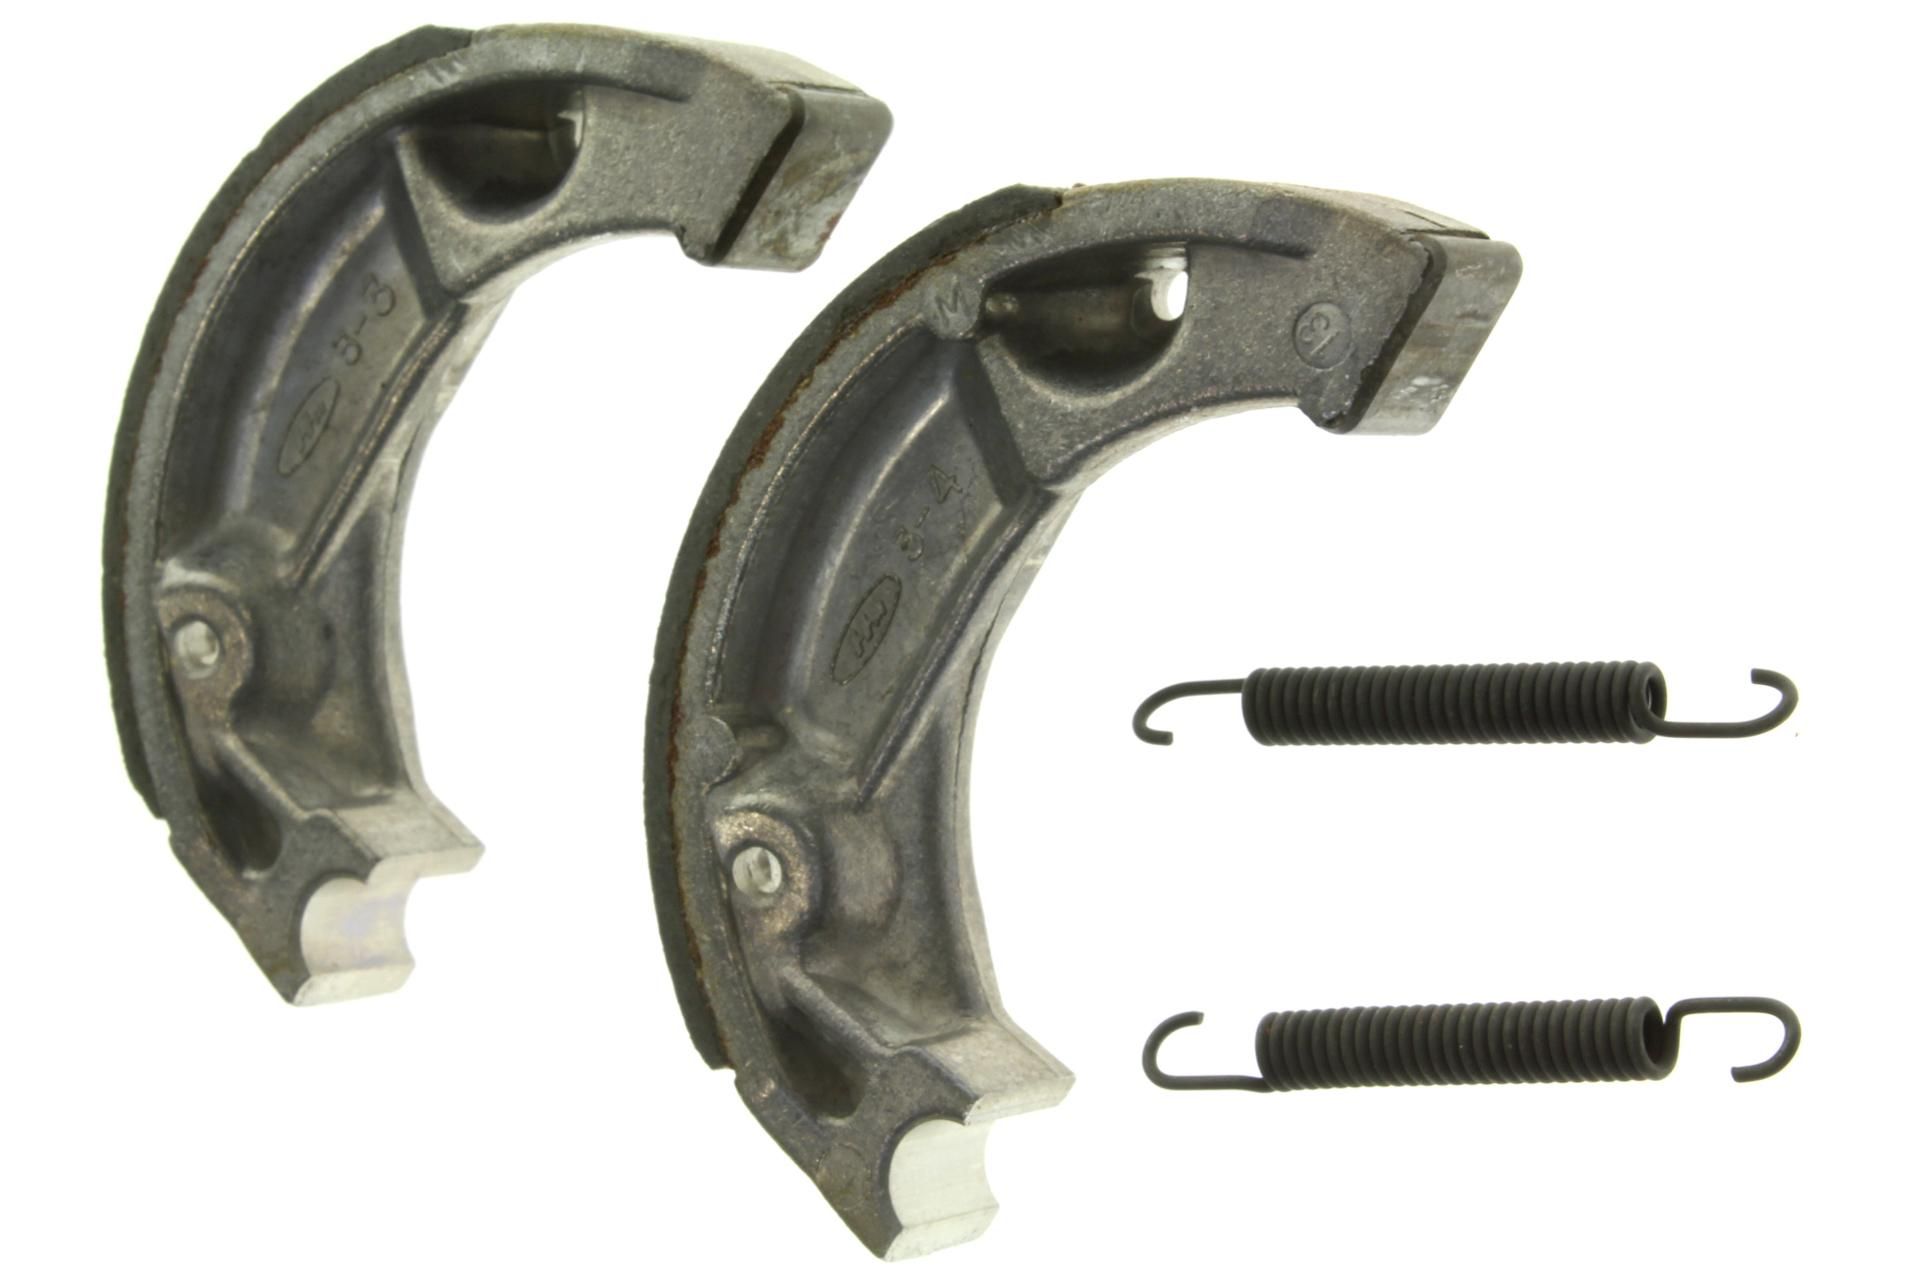 06430-GN1-A40 Superseded by 06430-GN1-730 - SHOE SET, BRAKE